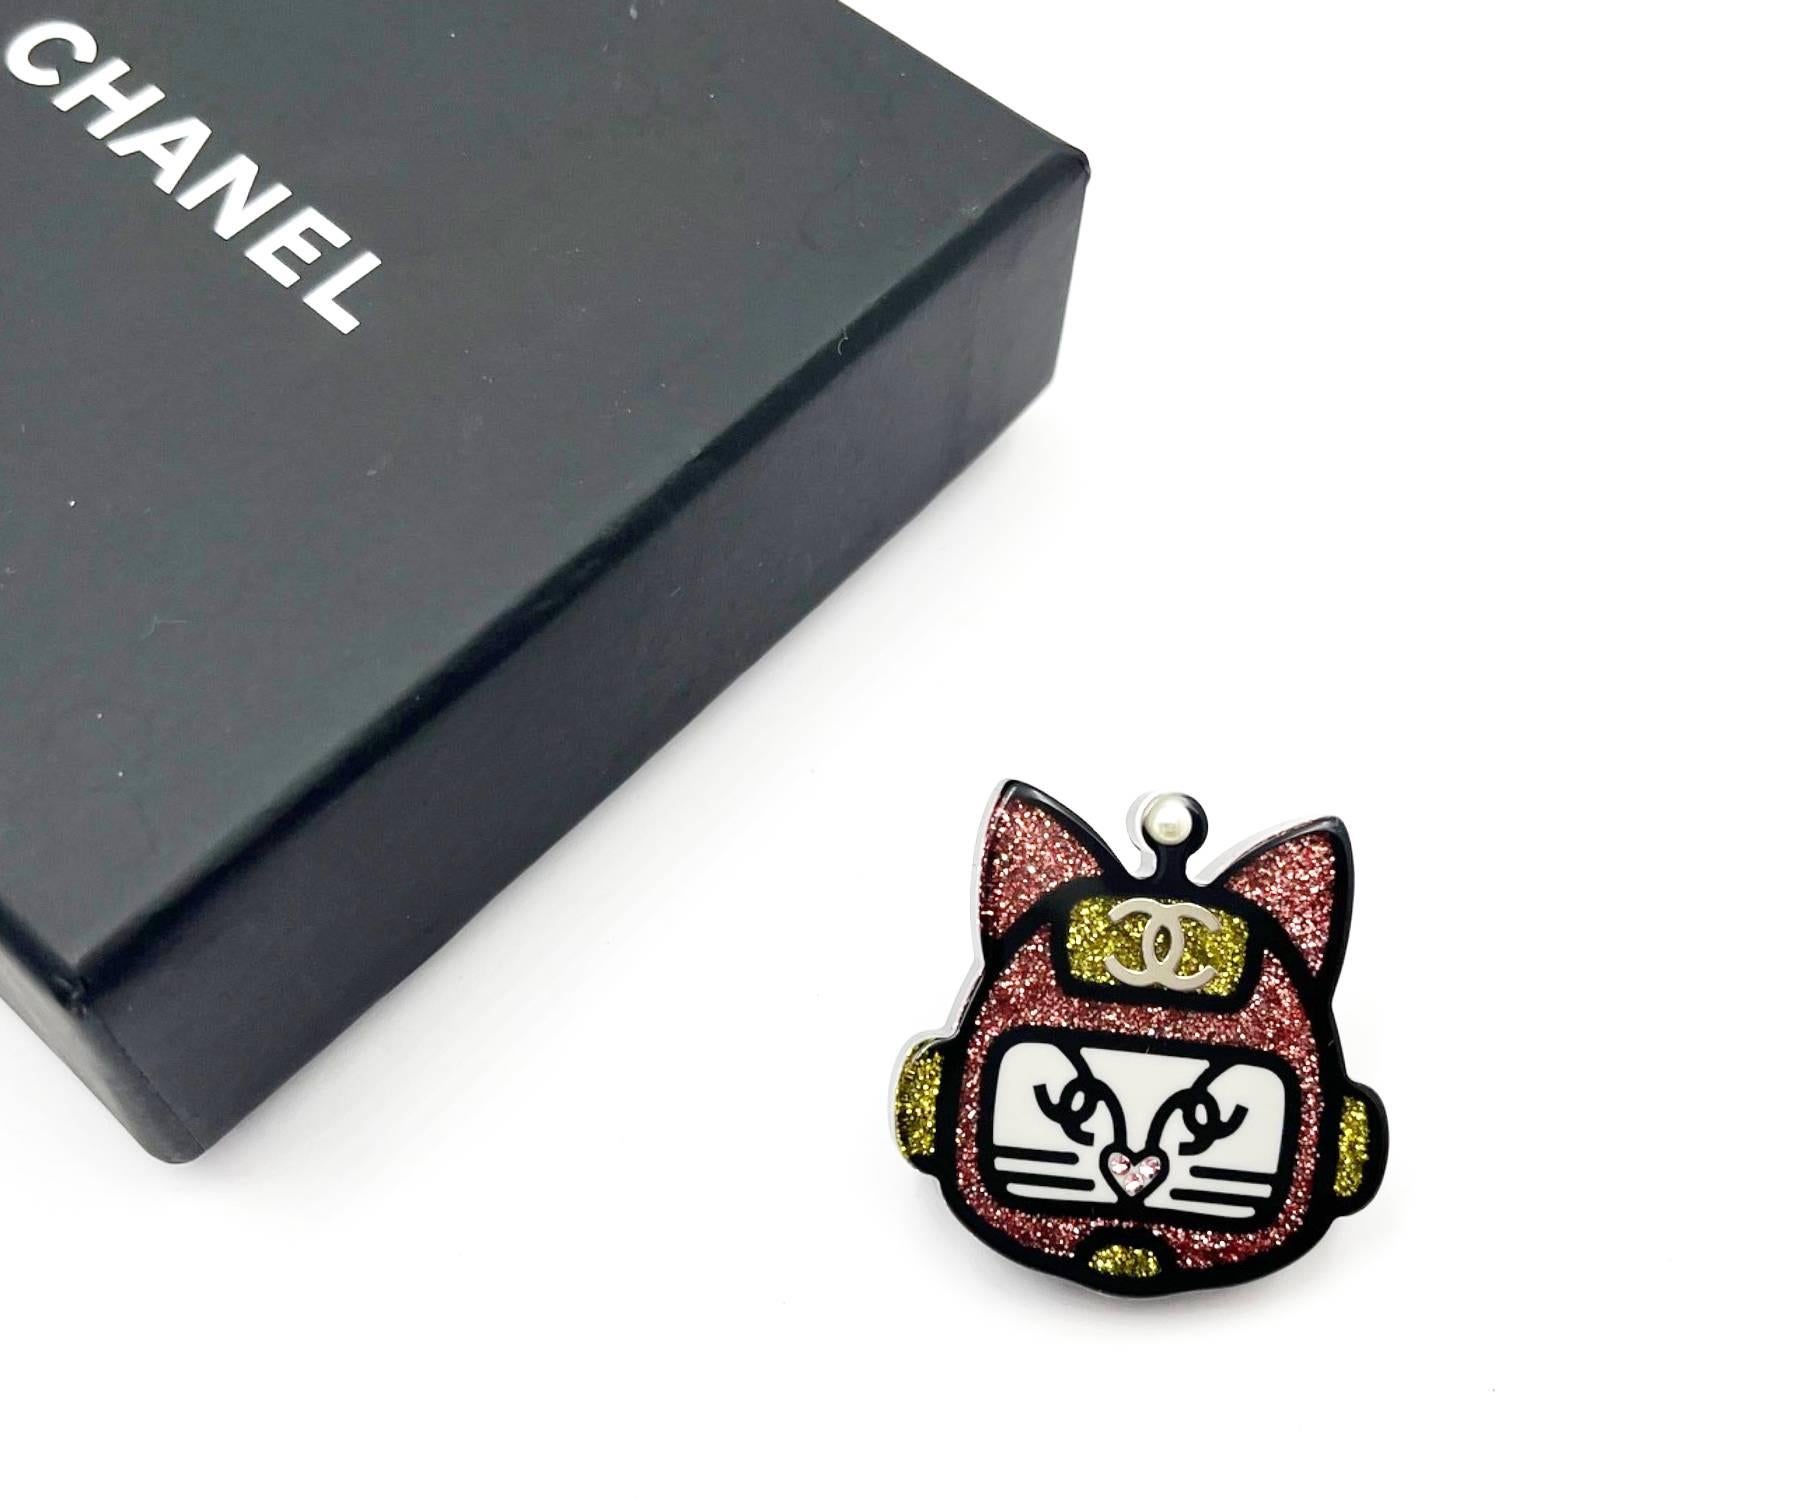 Chanel Black Red Yellow Glitter Cat Pin

* Marked 17
* Made in France
* Comes with original box and pouch

-Approximately 1.25″ x 1.3″
-Very classic and pretty
-In an excellent condition

AB2107-00369

